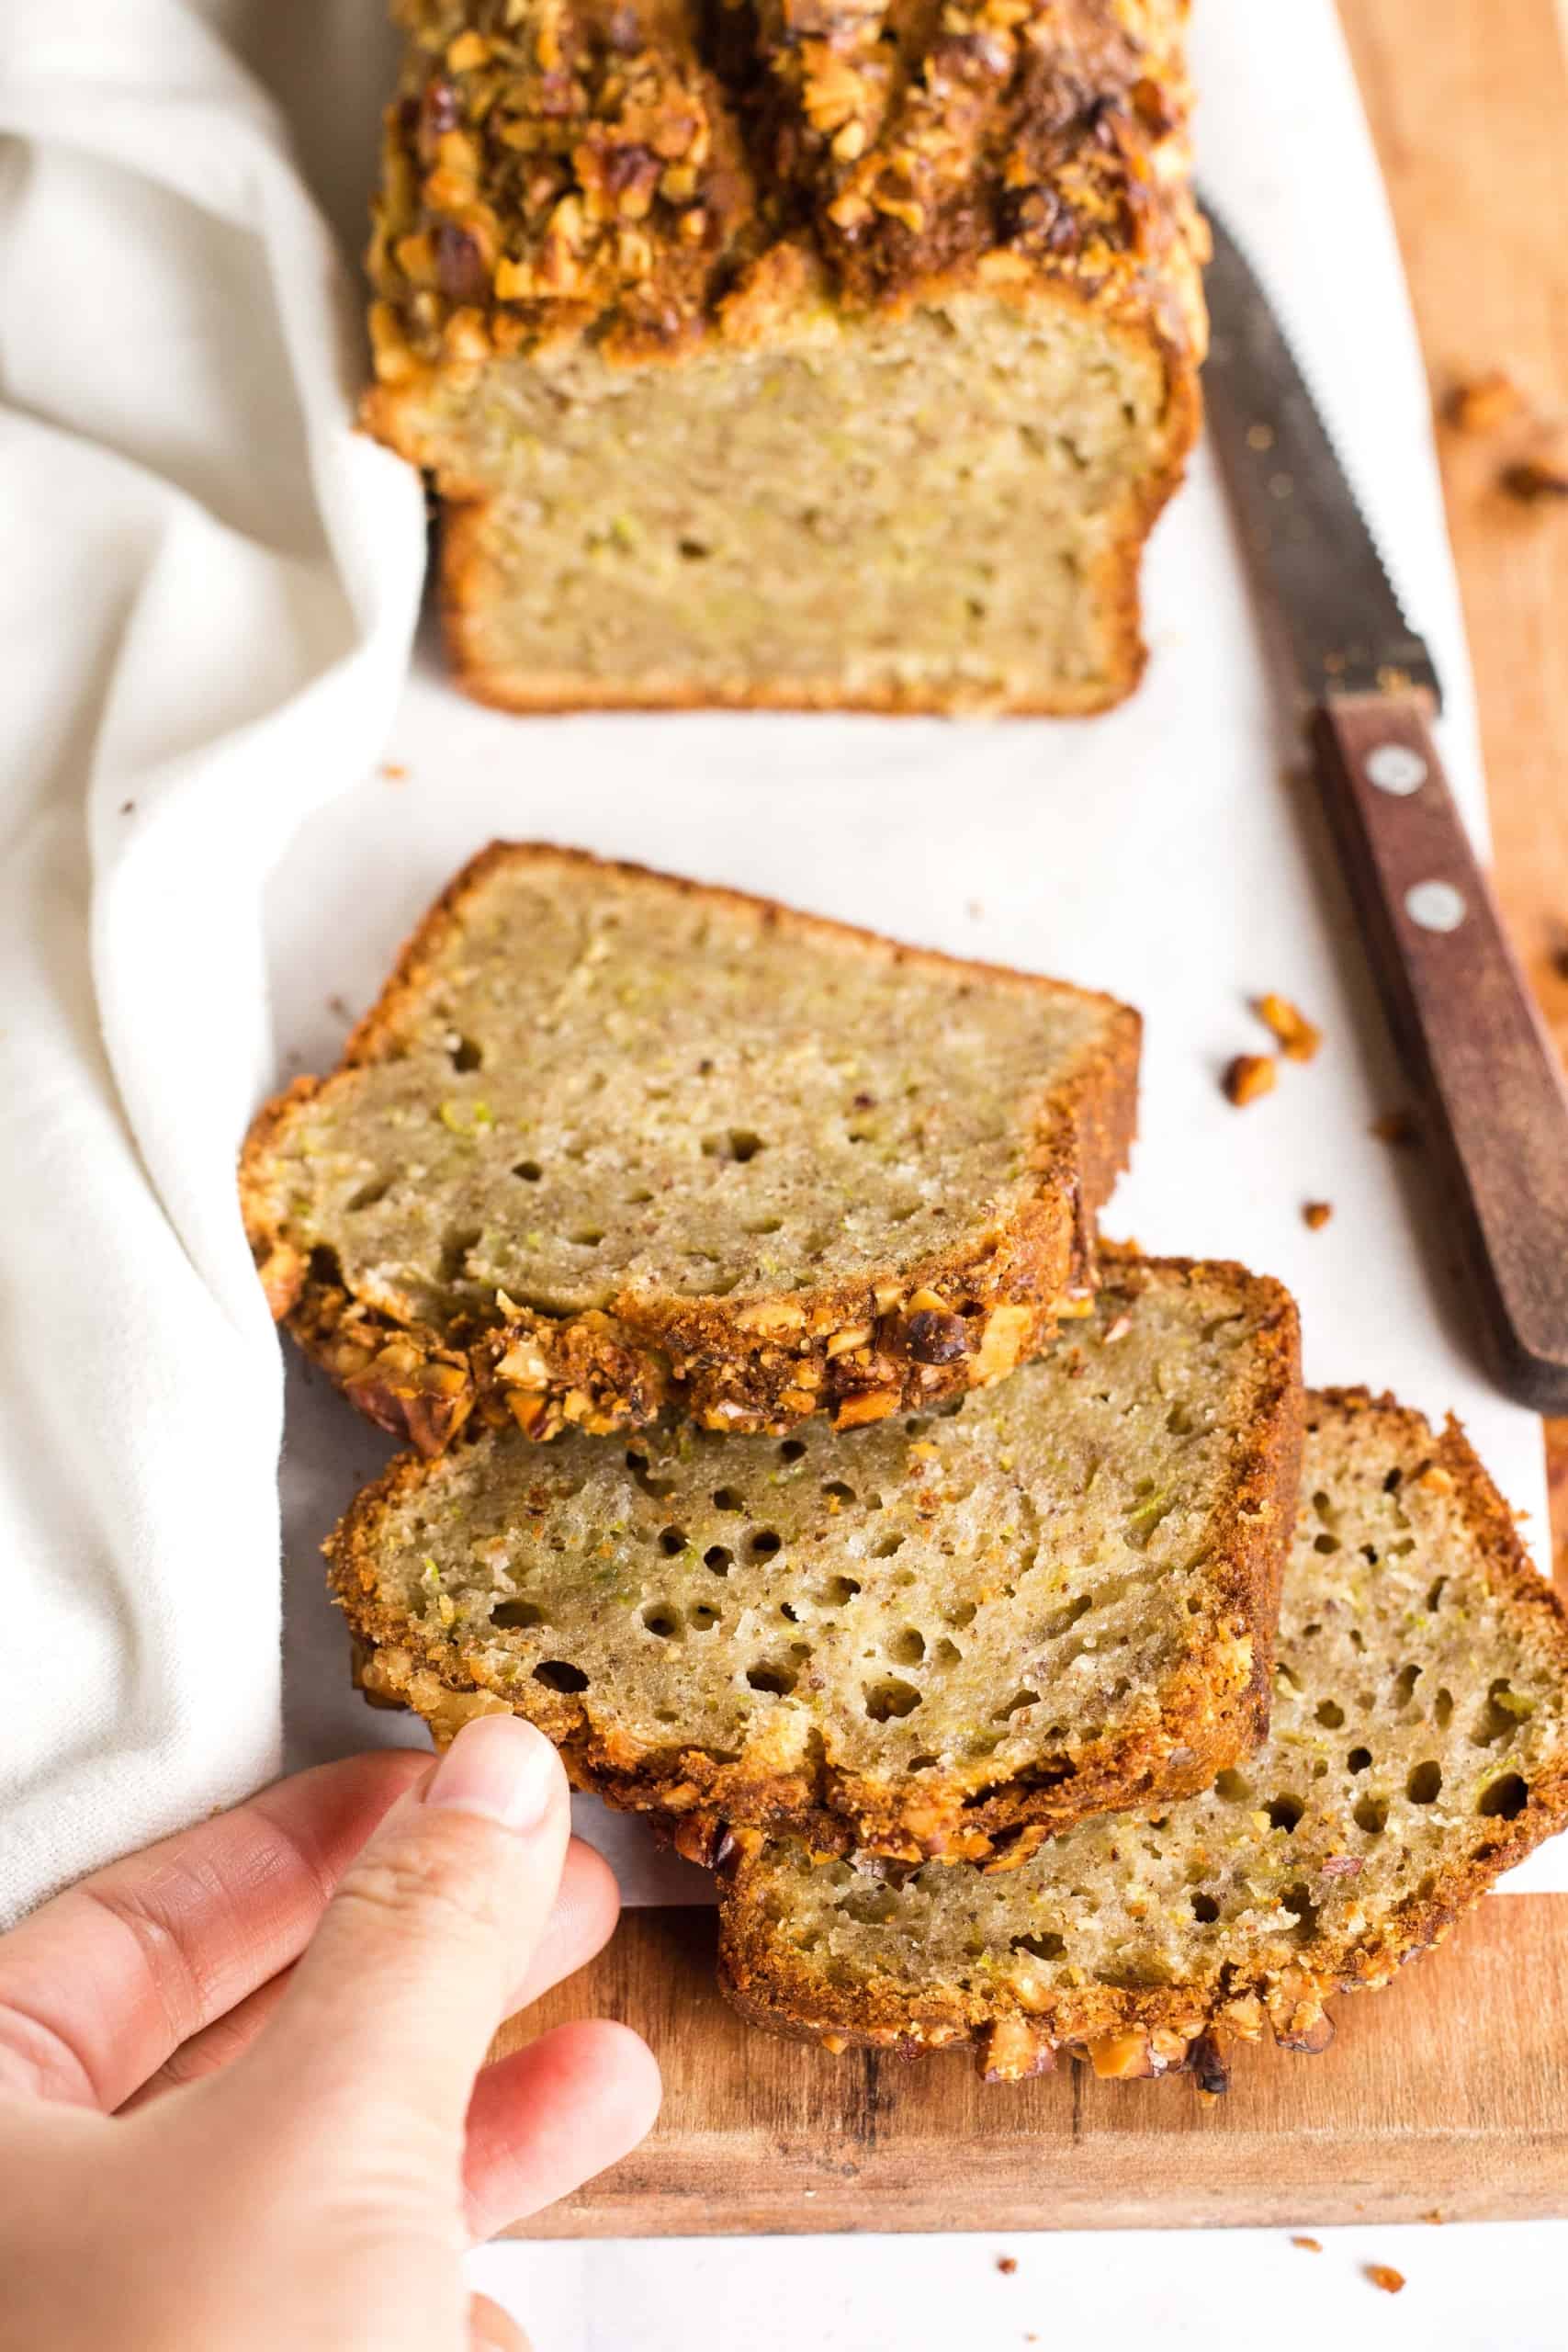 Hand reaching for a slice of zucchini bread.